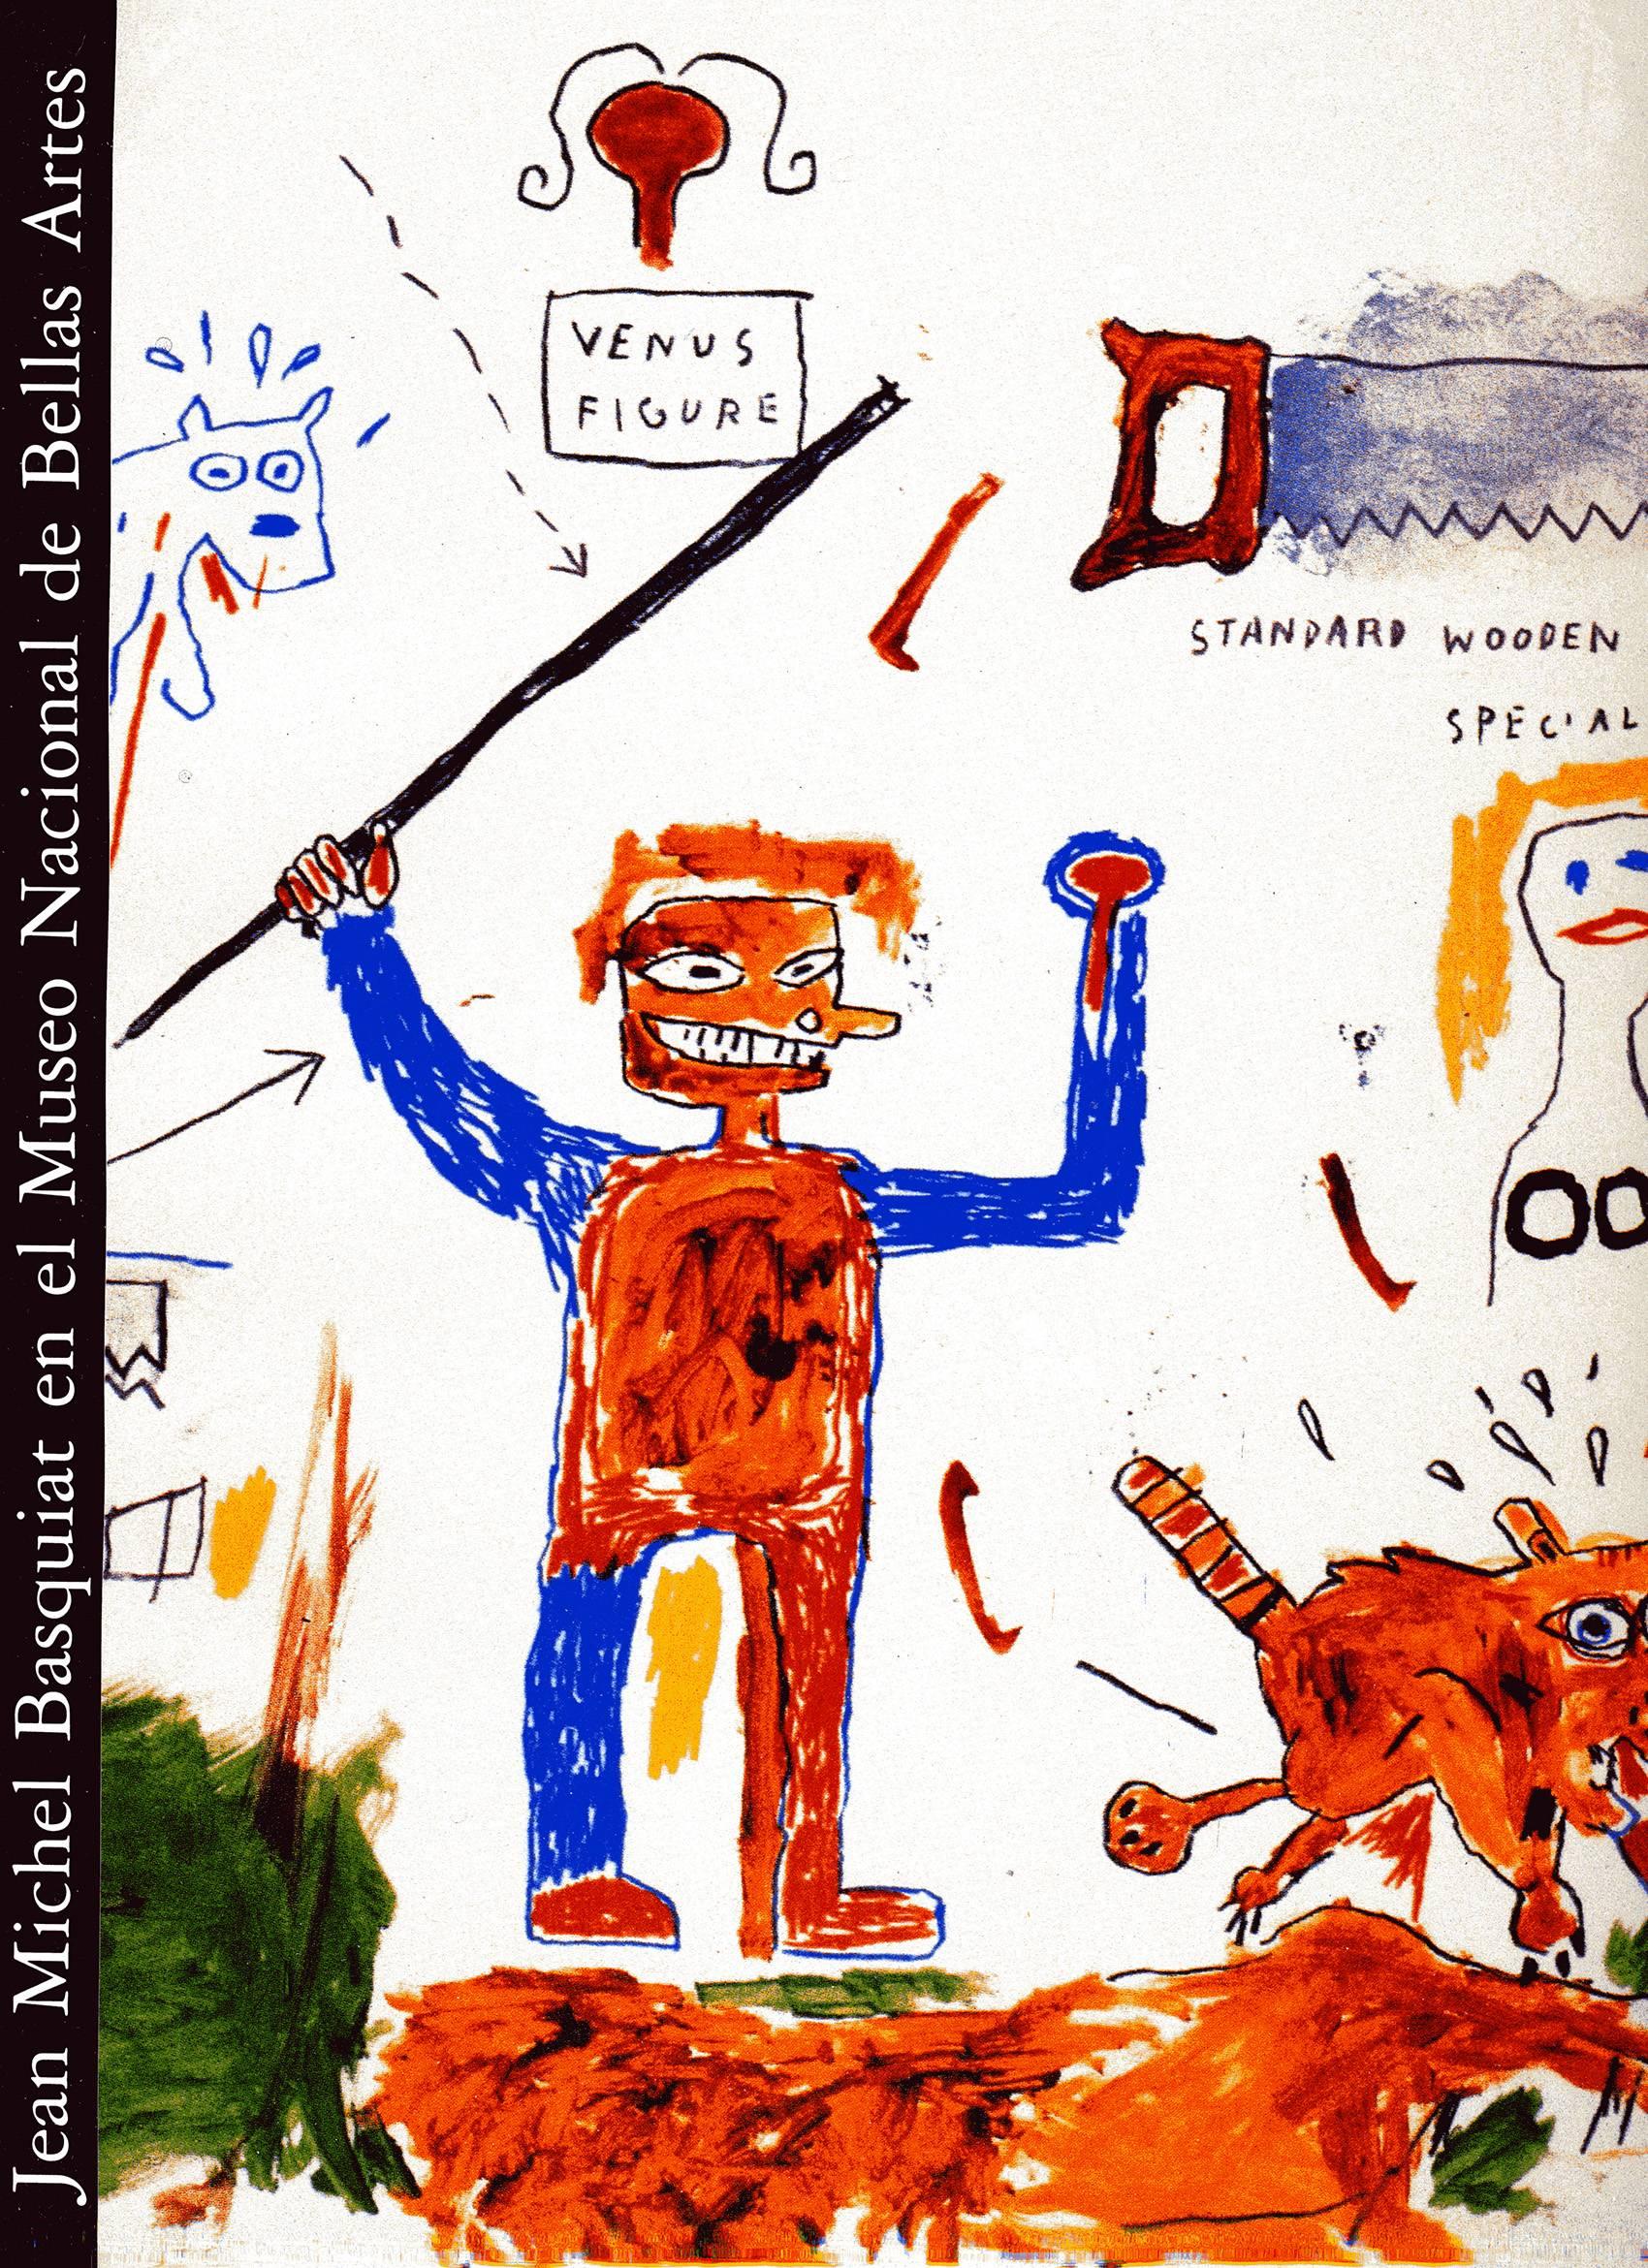 Basquiat Works on Paper Catalog, Buenos Aires